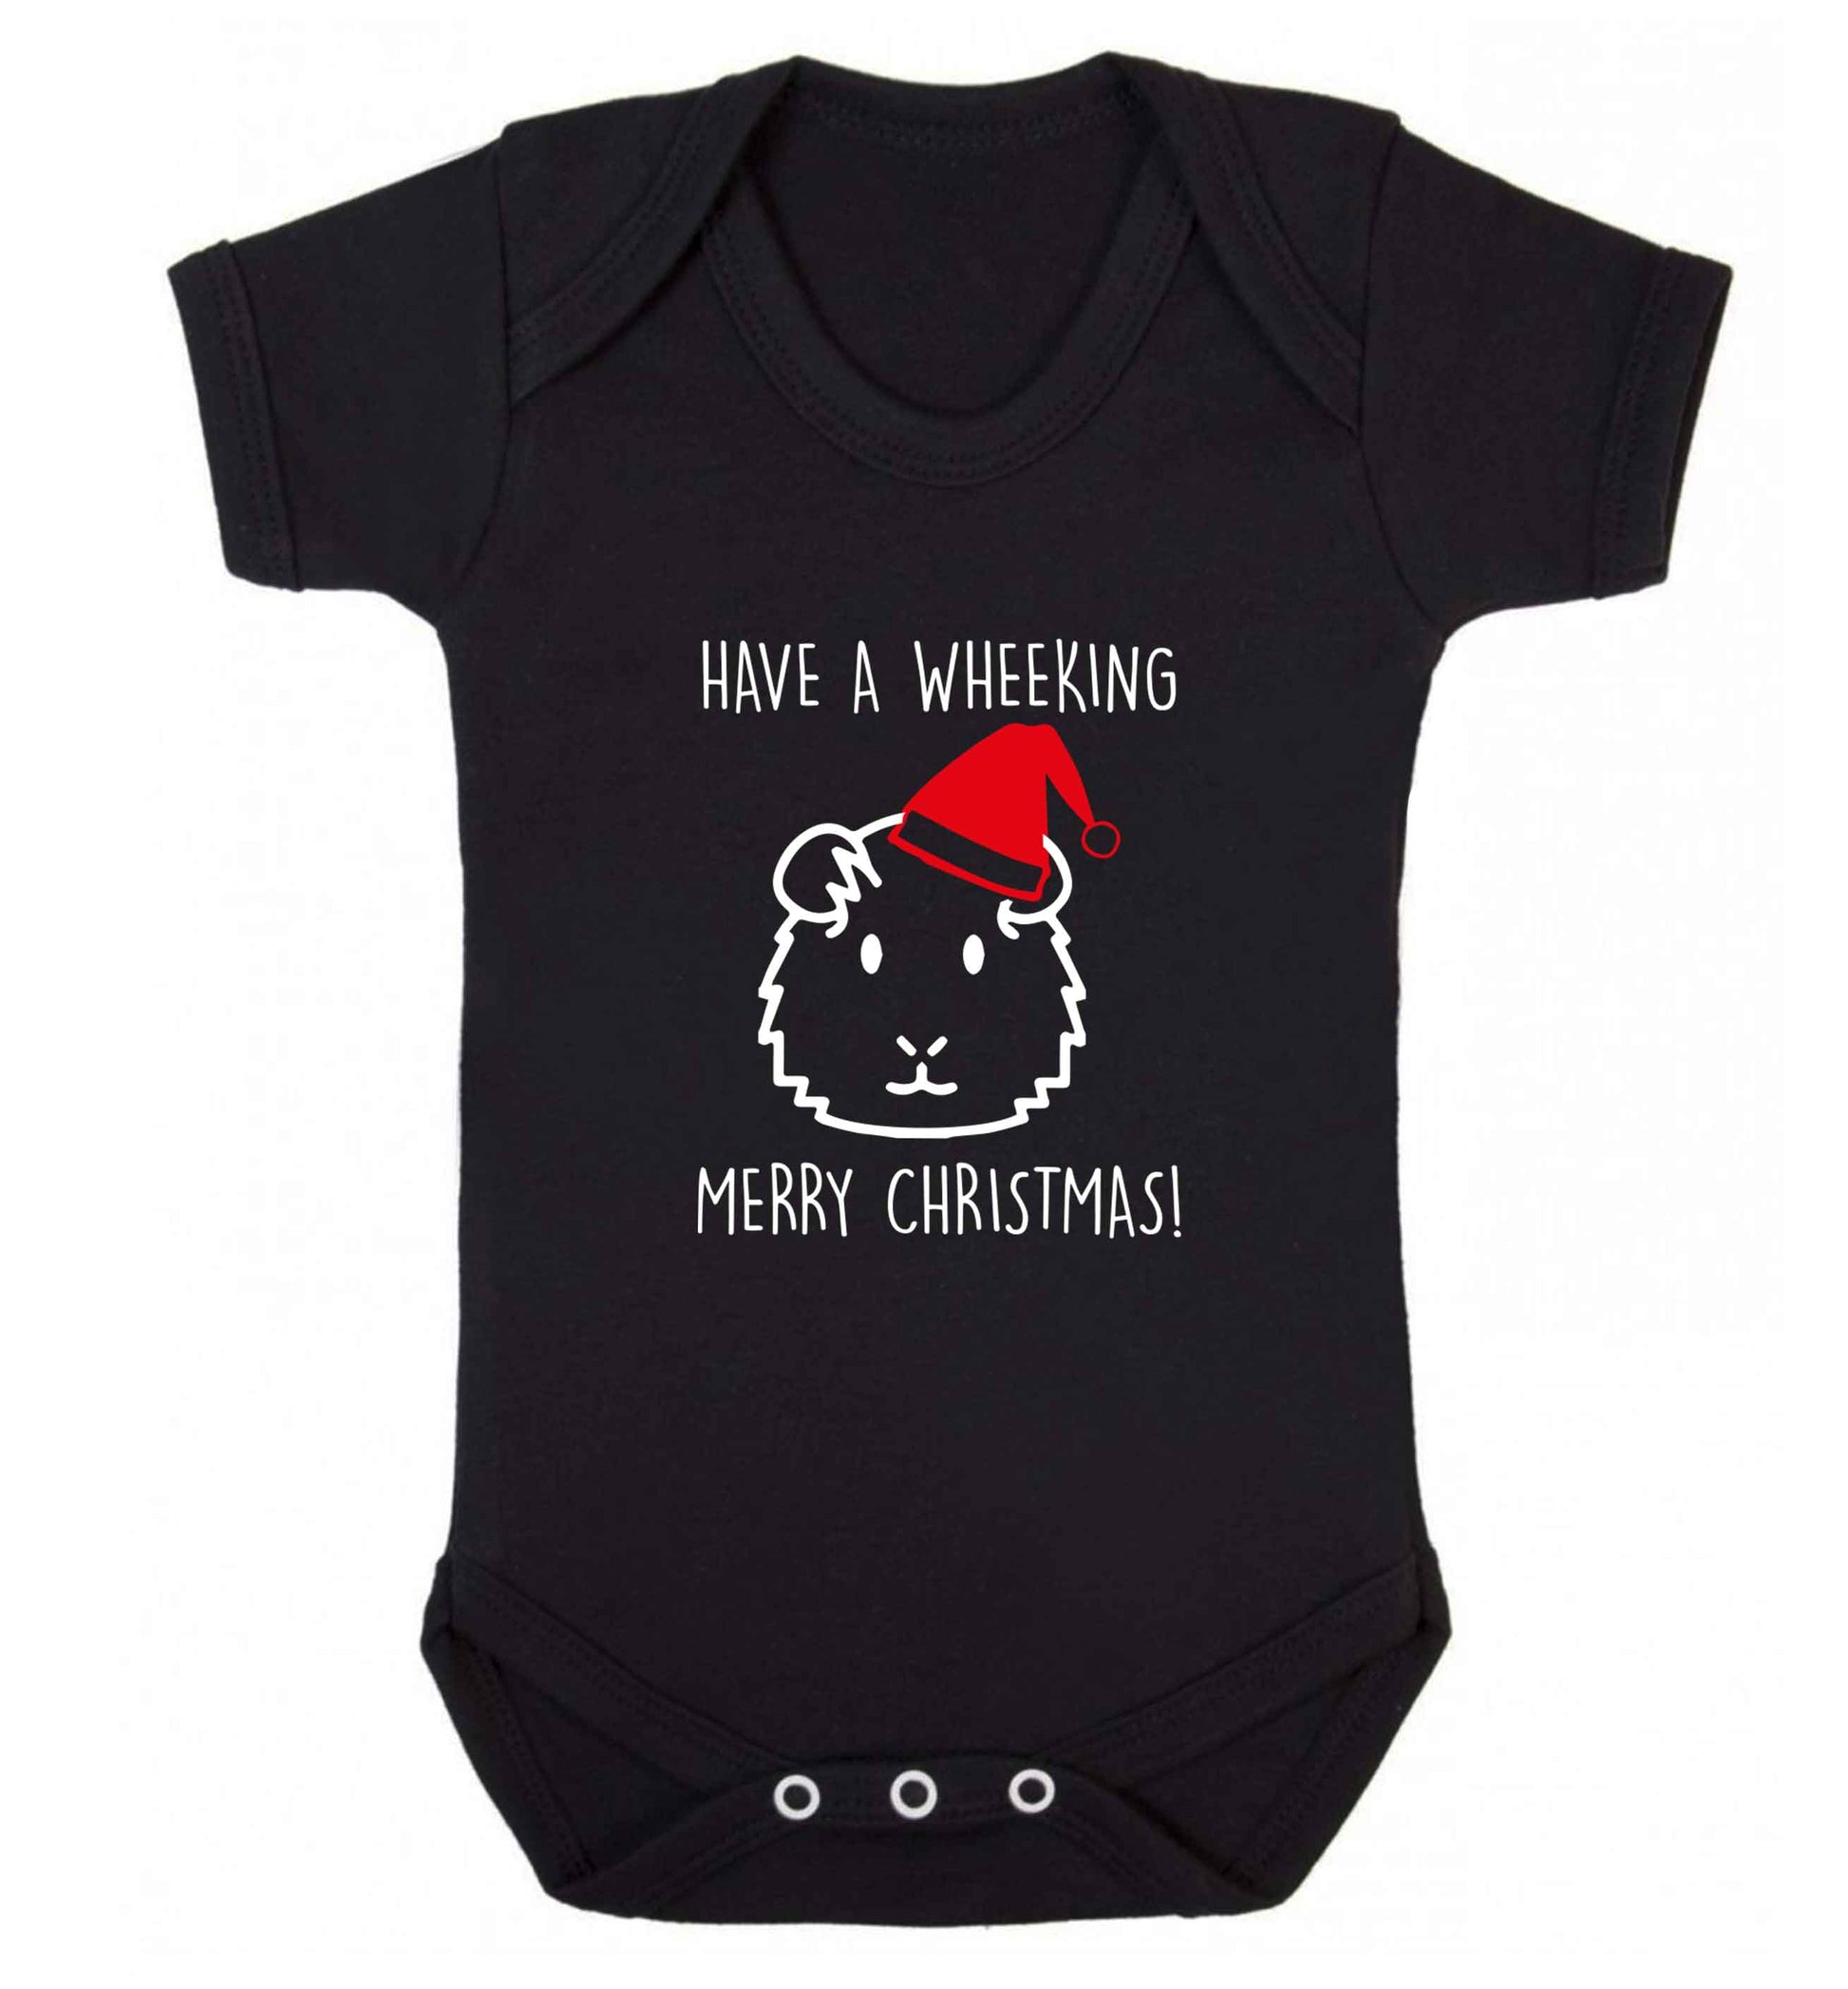 Have a wheeking merry Christmas baby vest black 18-24 months